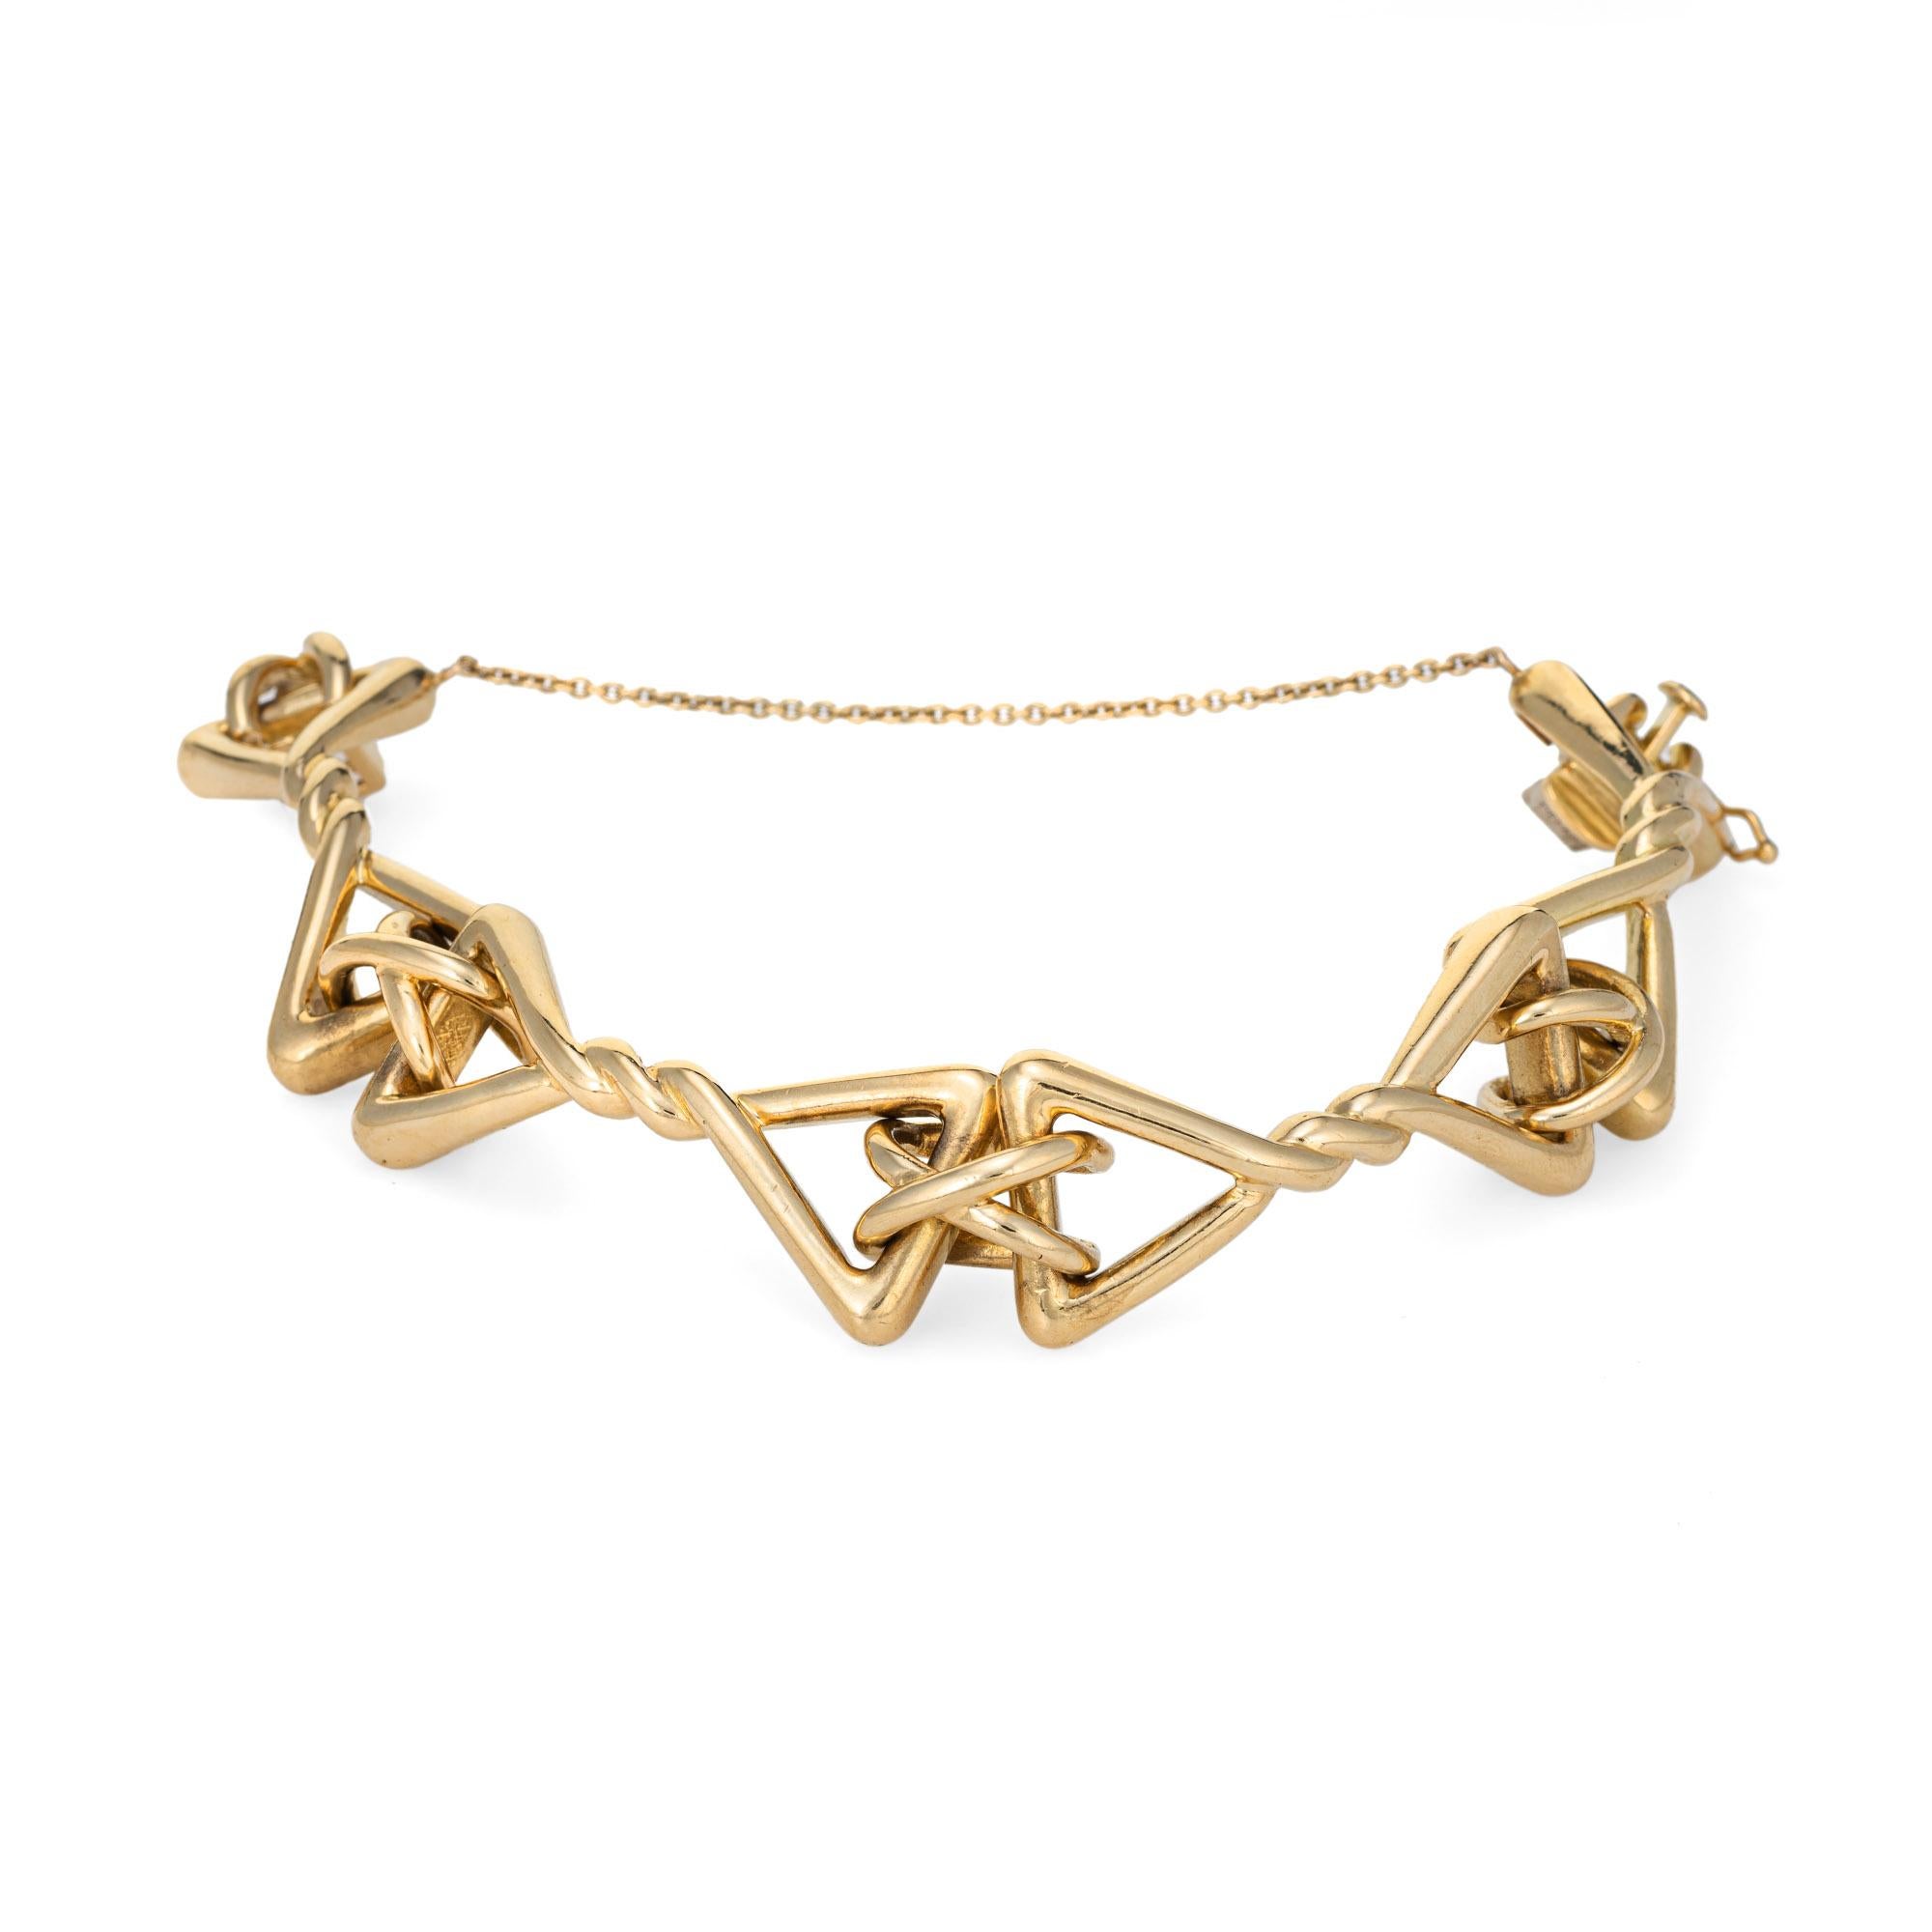 Stylish vintage Tiffany & Co bracelet crafted in 18 karat yellow gold (circa 1960s).  

The chunky bracelet is a Tiffany classic, with triangular twist links conjoined with smaller crossover links. Weighing 51.1 grams the bracelet has a hefty, solid